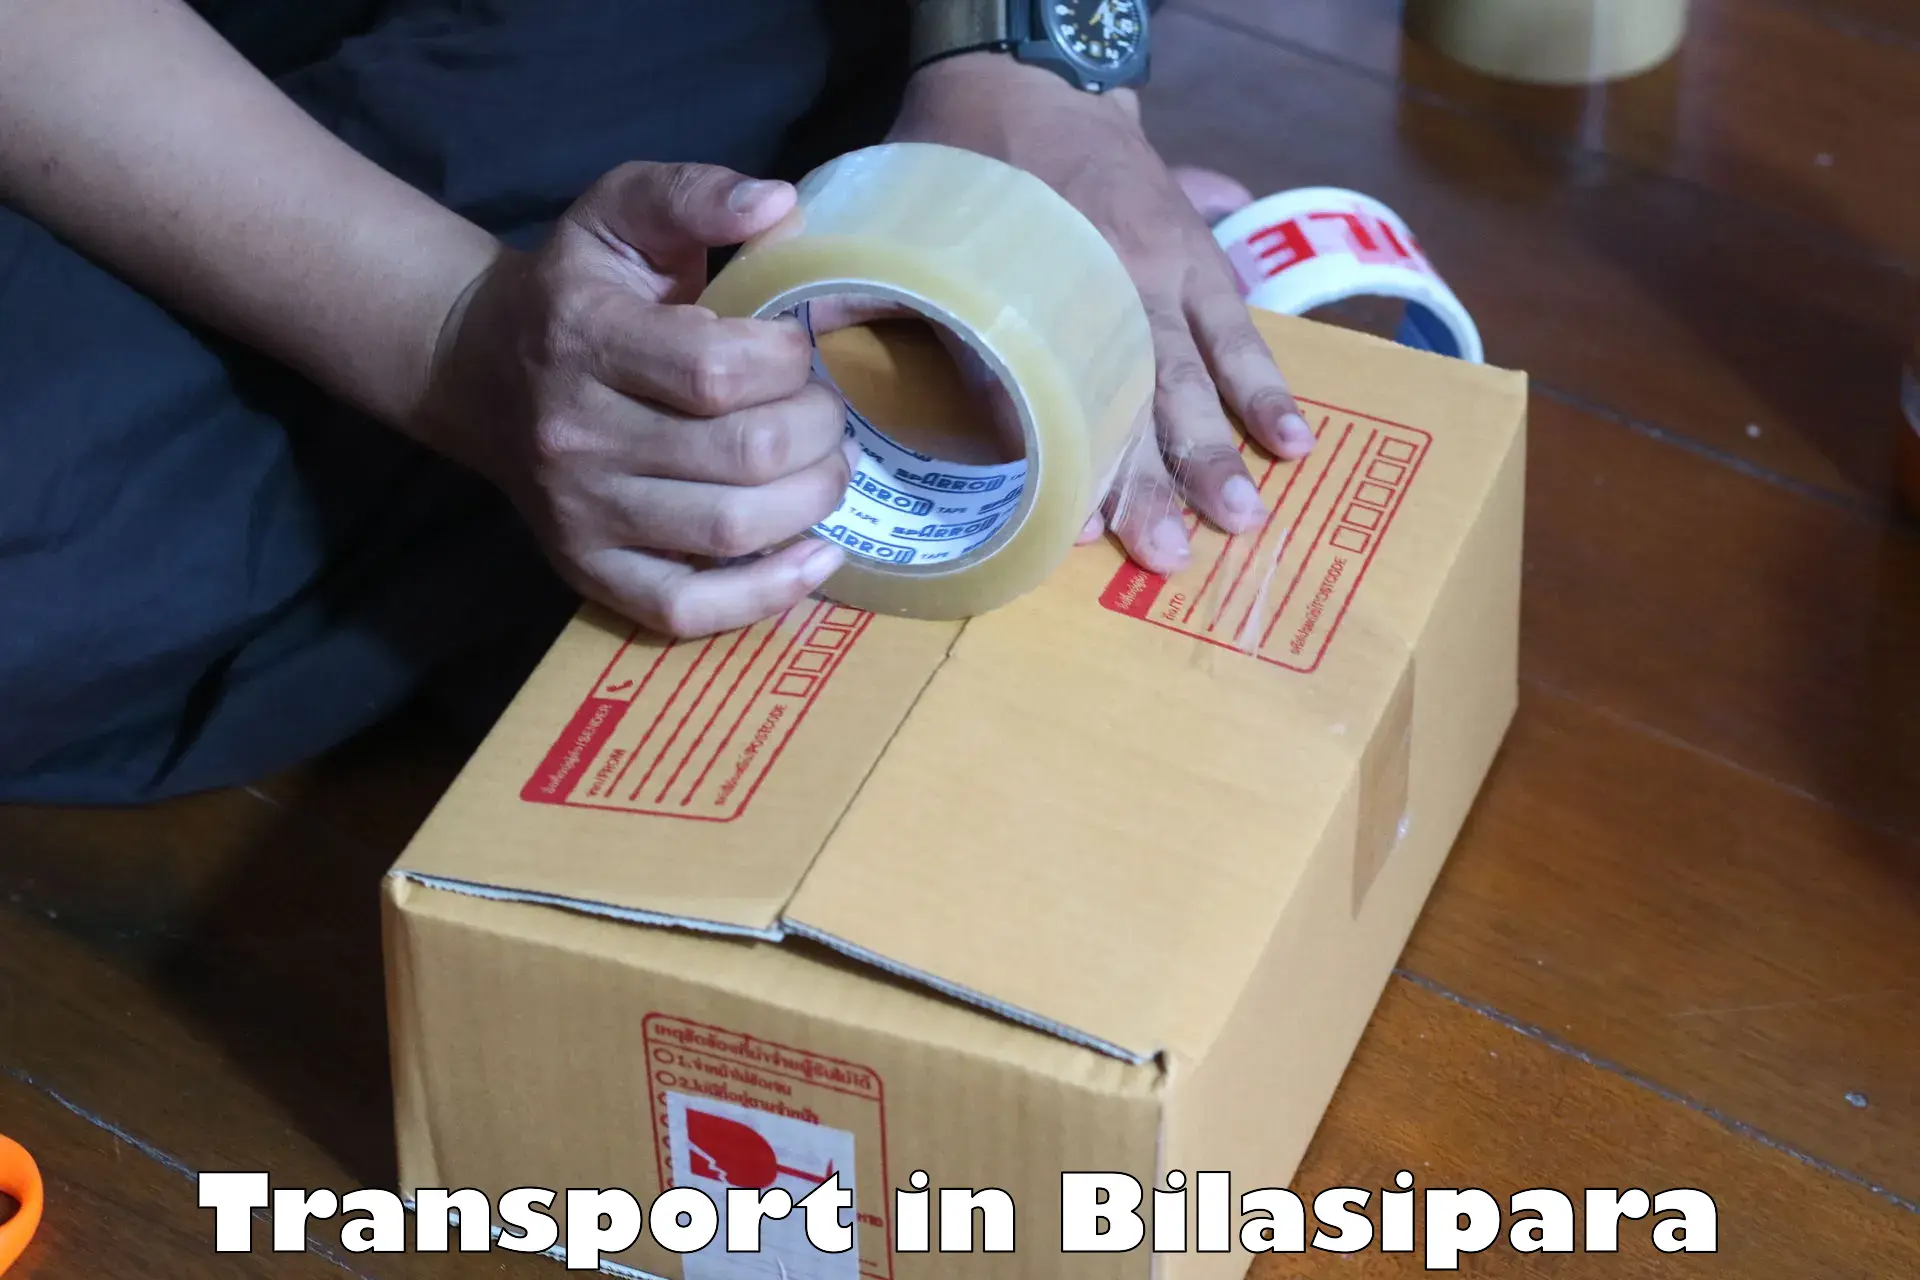 Air freight transport services in Bilasipara